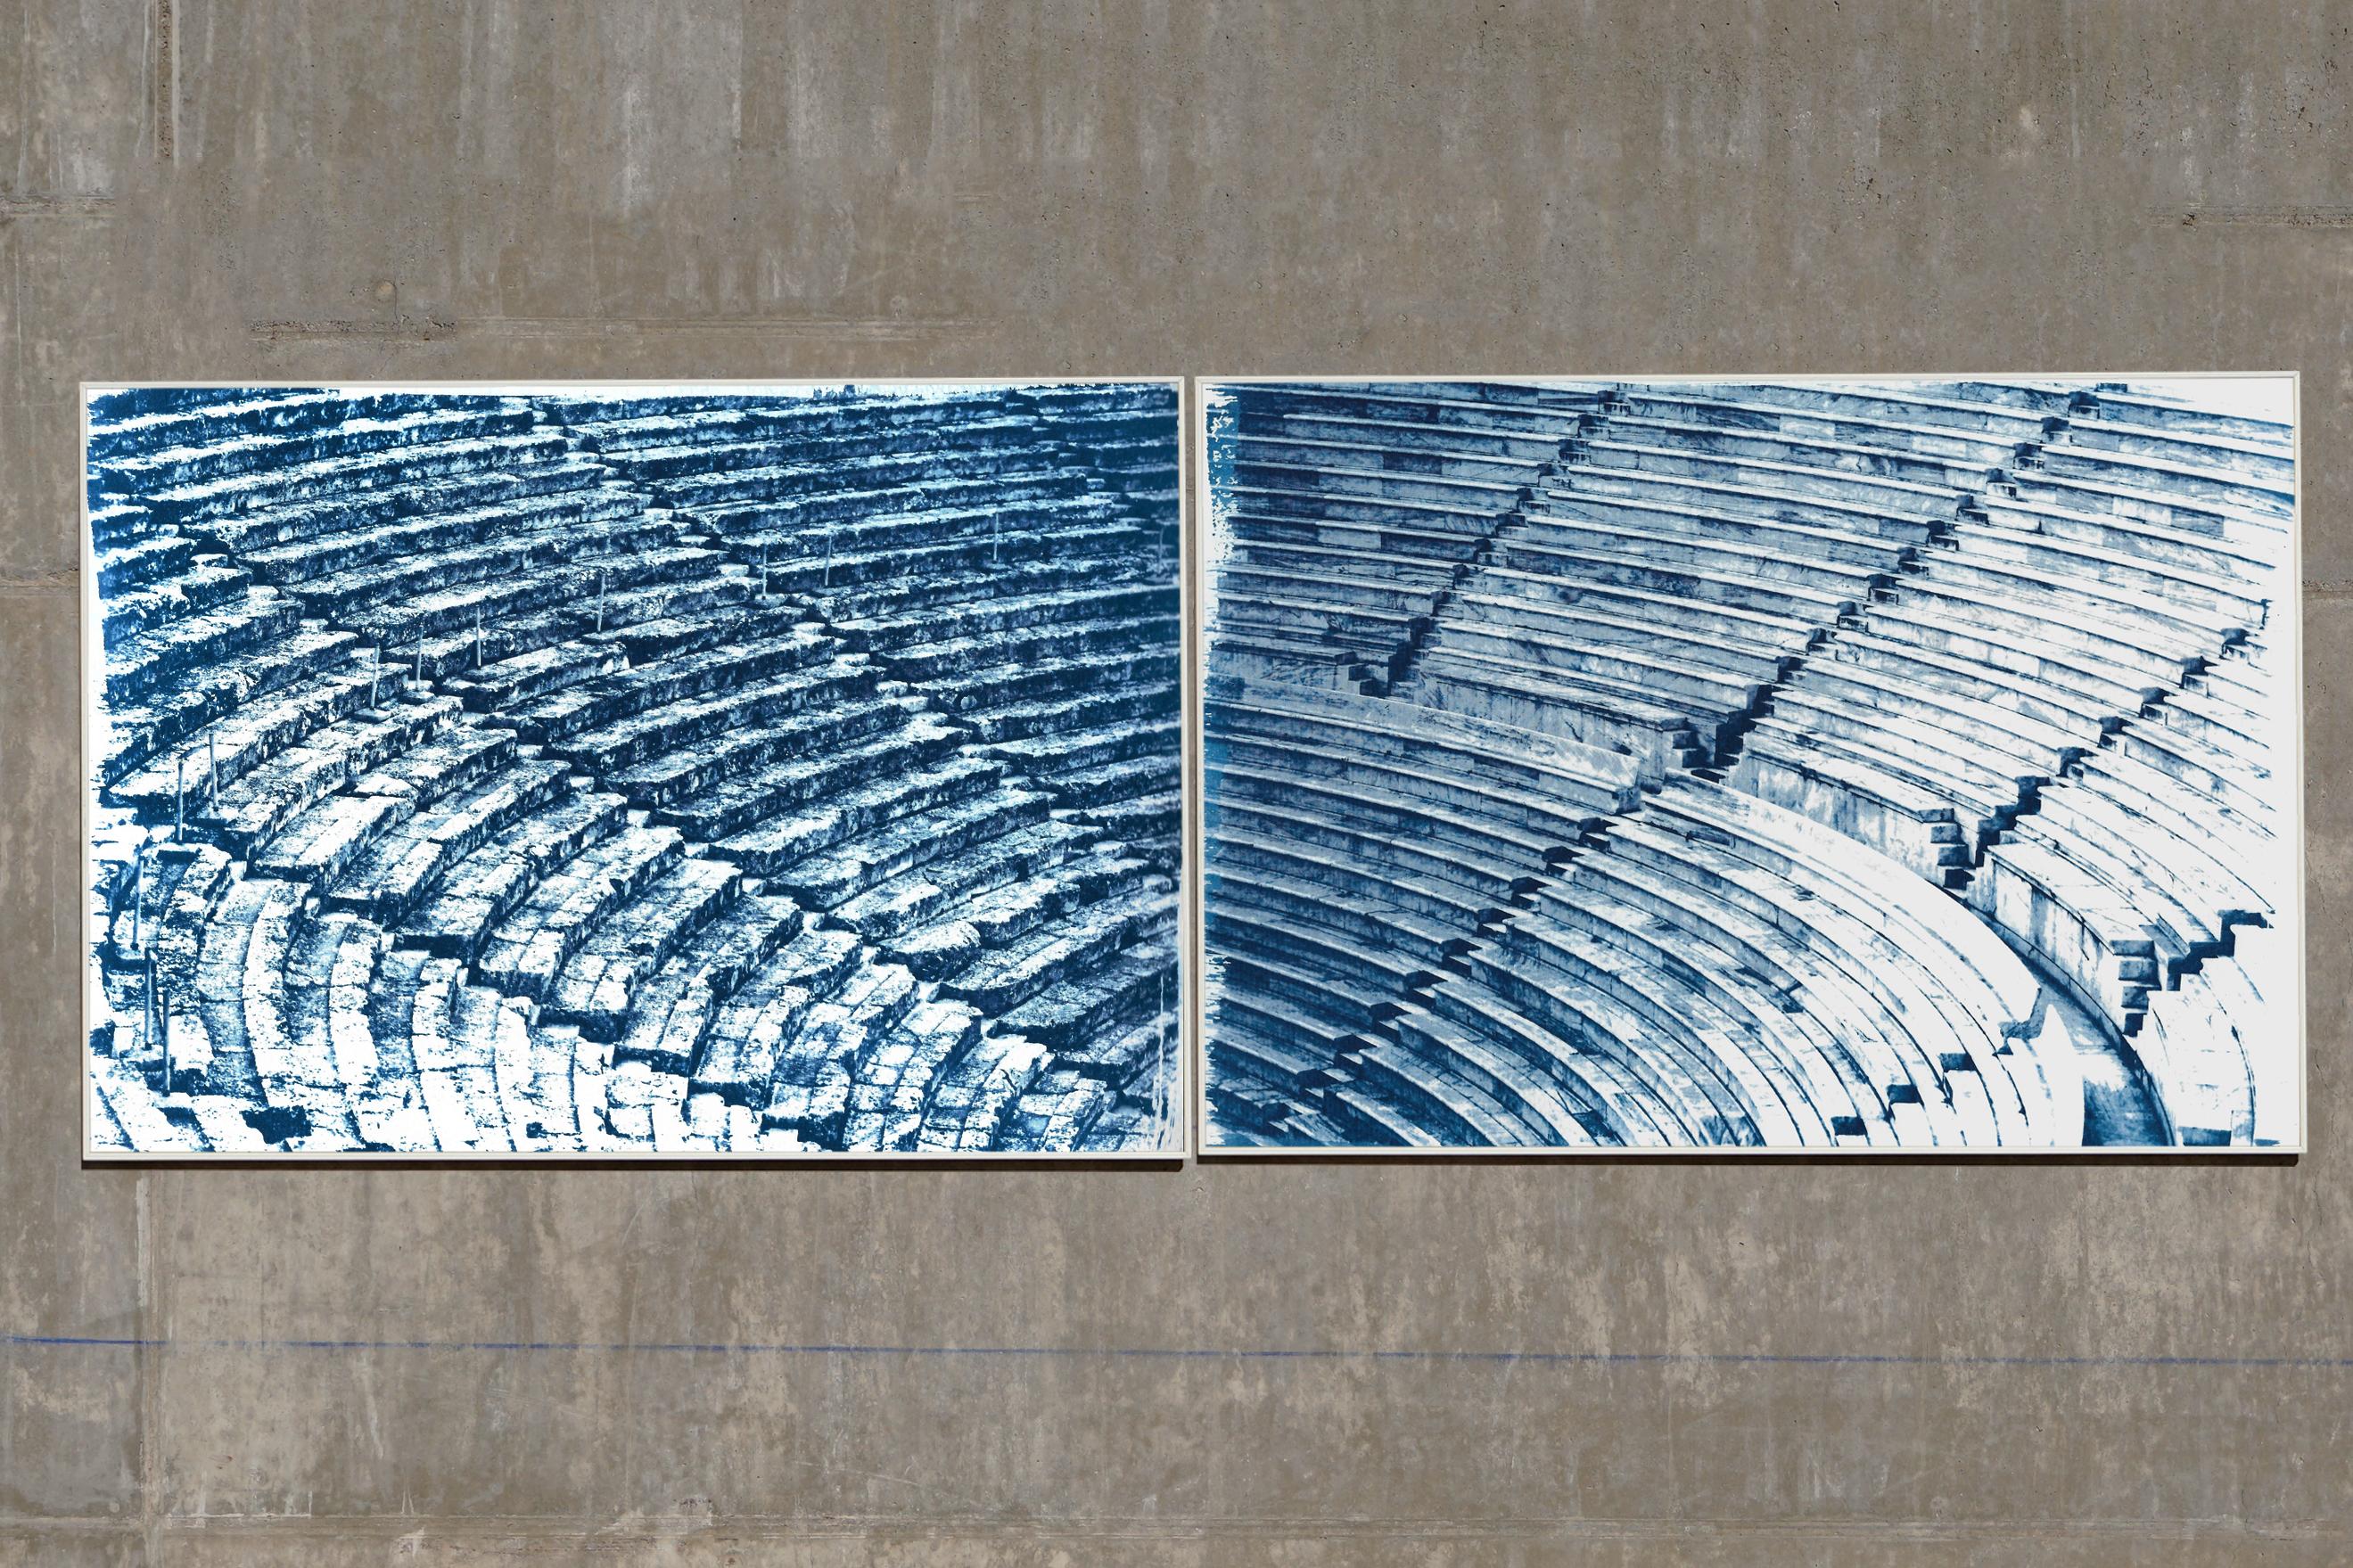 Diptych of Ancient Theatres, Handmade Cyanotype, Greek and Roman Architecture - Print by Kind of Cyan